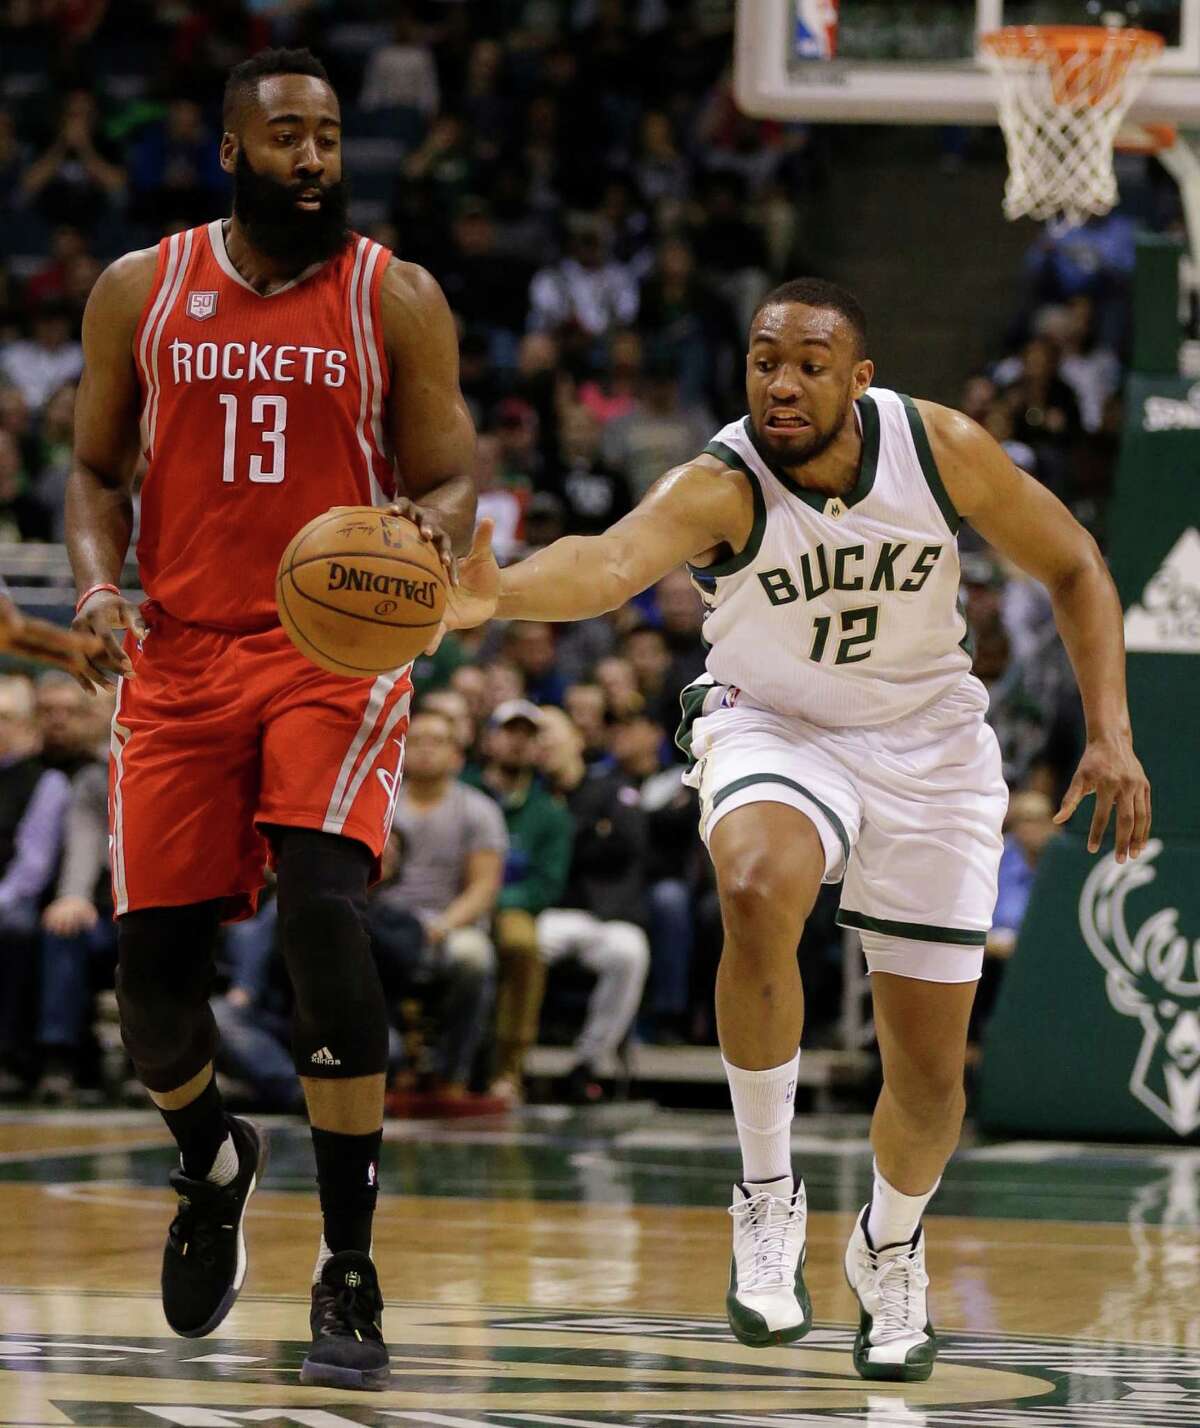 The Bucks' Jabari Parker, right, sneaks in for a steal that accounts for one of James Harden's 11 turnovers on a night the Rockets totaled 21.